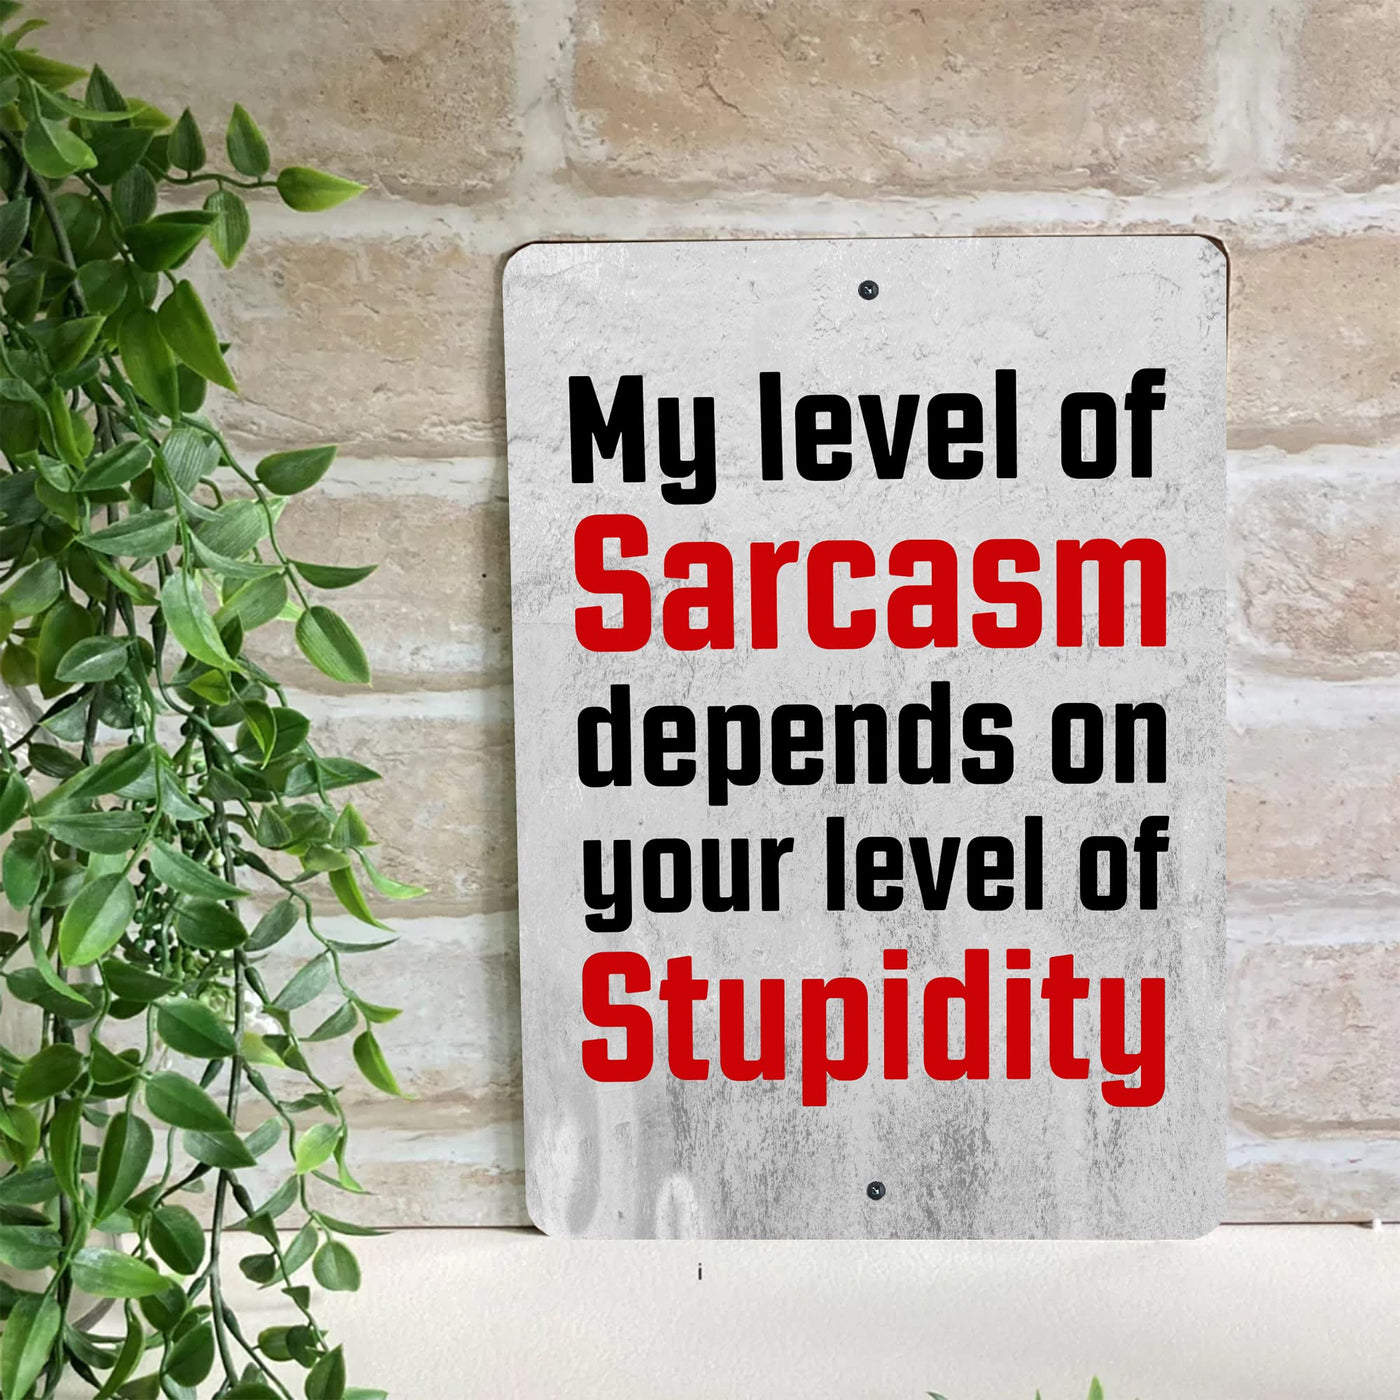 Level of Sarcasm Depends on Stupidity Metal Signs Vintage Wall Art -8 x 12" Funny Rustic Sign for Bar, Garage, Man Cave, Shop -Retro Tin Sign for Home-Office Decor, Accessories & Sarcastic Gifts!